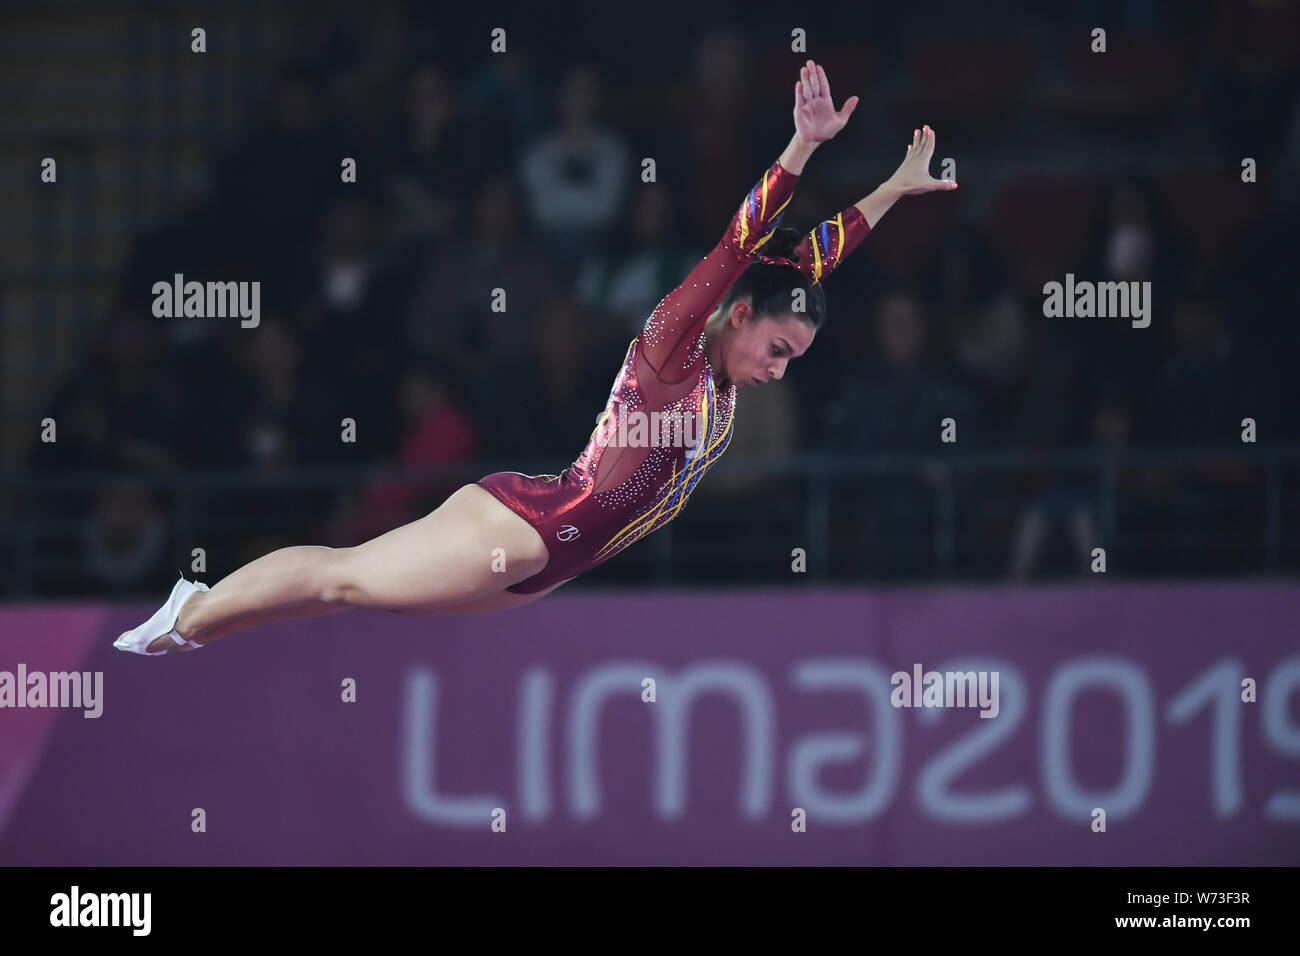 Lima, Peru. 4th Aug, 2019. KATISH HERNANDEZ from Colombia flips upside down during the competition held in the Polideportivo Villa El Salvador in Lima, Peru. Credit: Amy Sanderson/ZUMA Wire/Alamy Live News Stock Photo